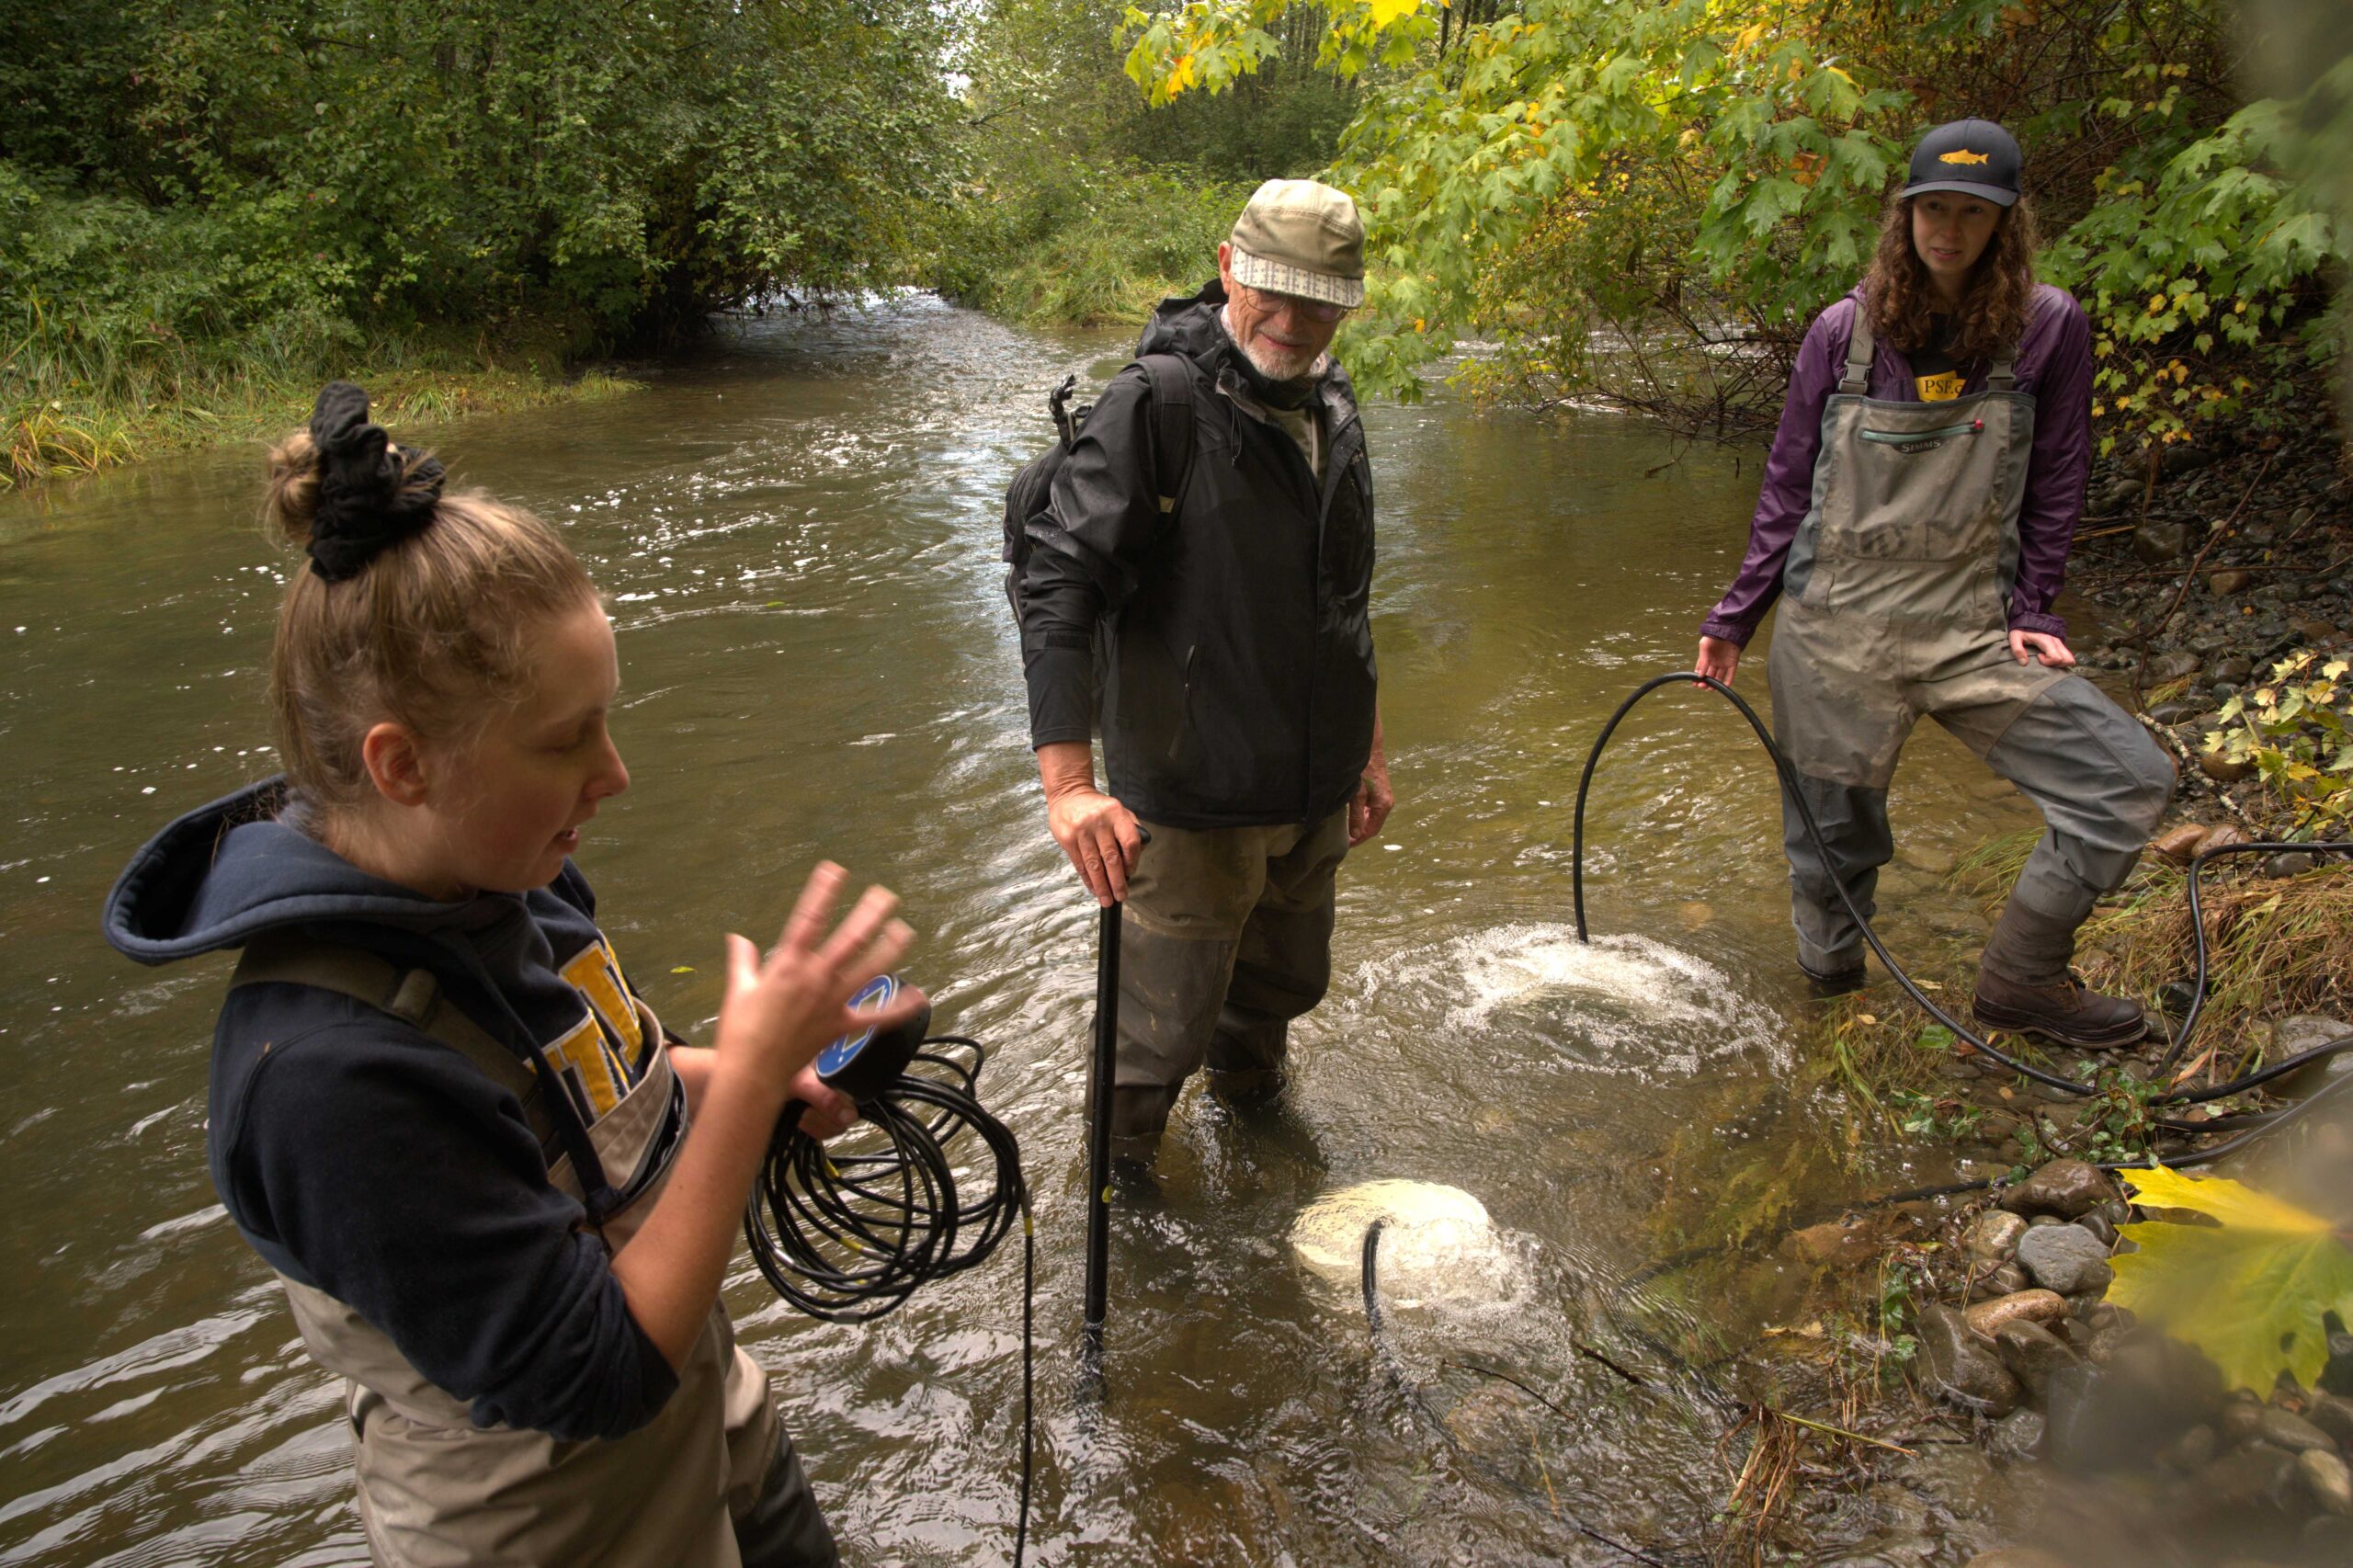 Katie Gair (TRRS) describes the deployment of portable aeration units in refuge pools of the Tsolum River to increase the survival of pink salmon adults returning to spawn. Allan Chamberlain (TRRS) and Jane Pendray (PSF) stand in the Tsolum River holding tubes leading to aeration units that are actively bubbling oxygen into the water.